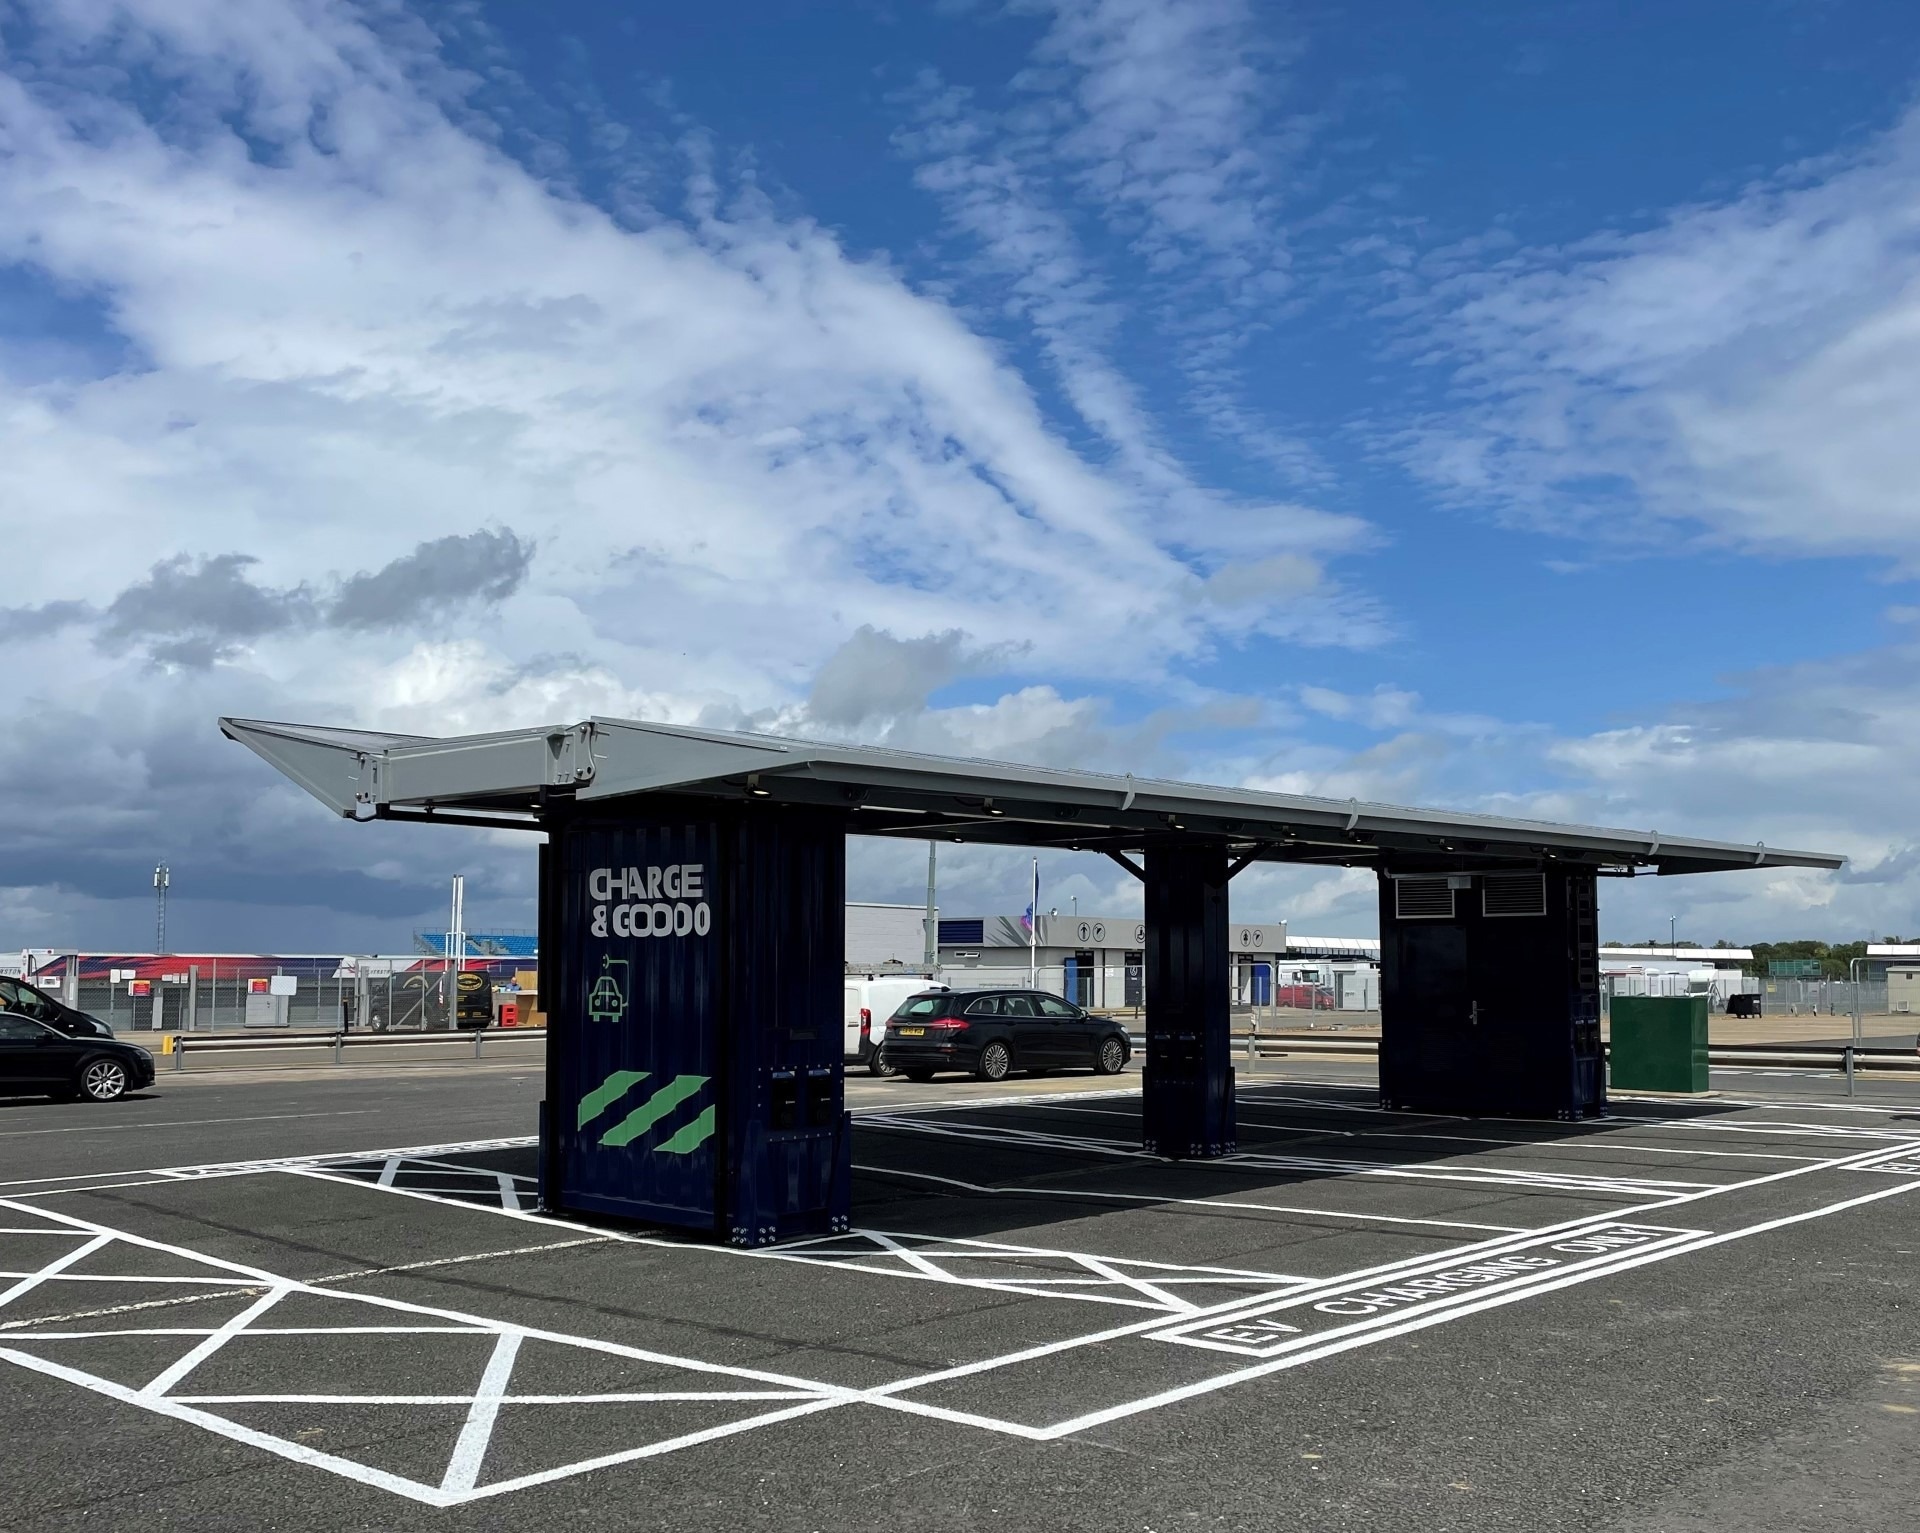 3ti Supports Silverstone’s Sustainability Strategy with Solar-Powered EV Charging Hubs